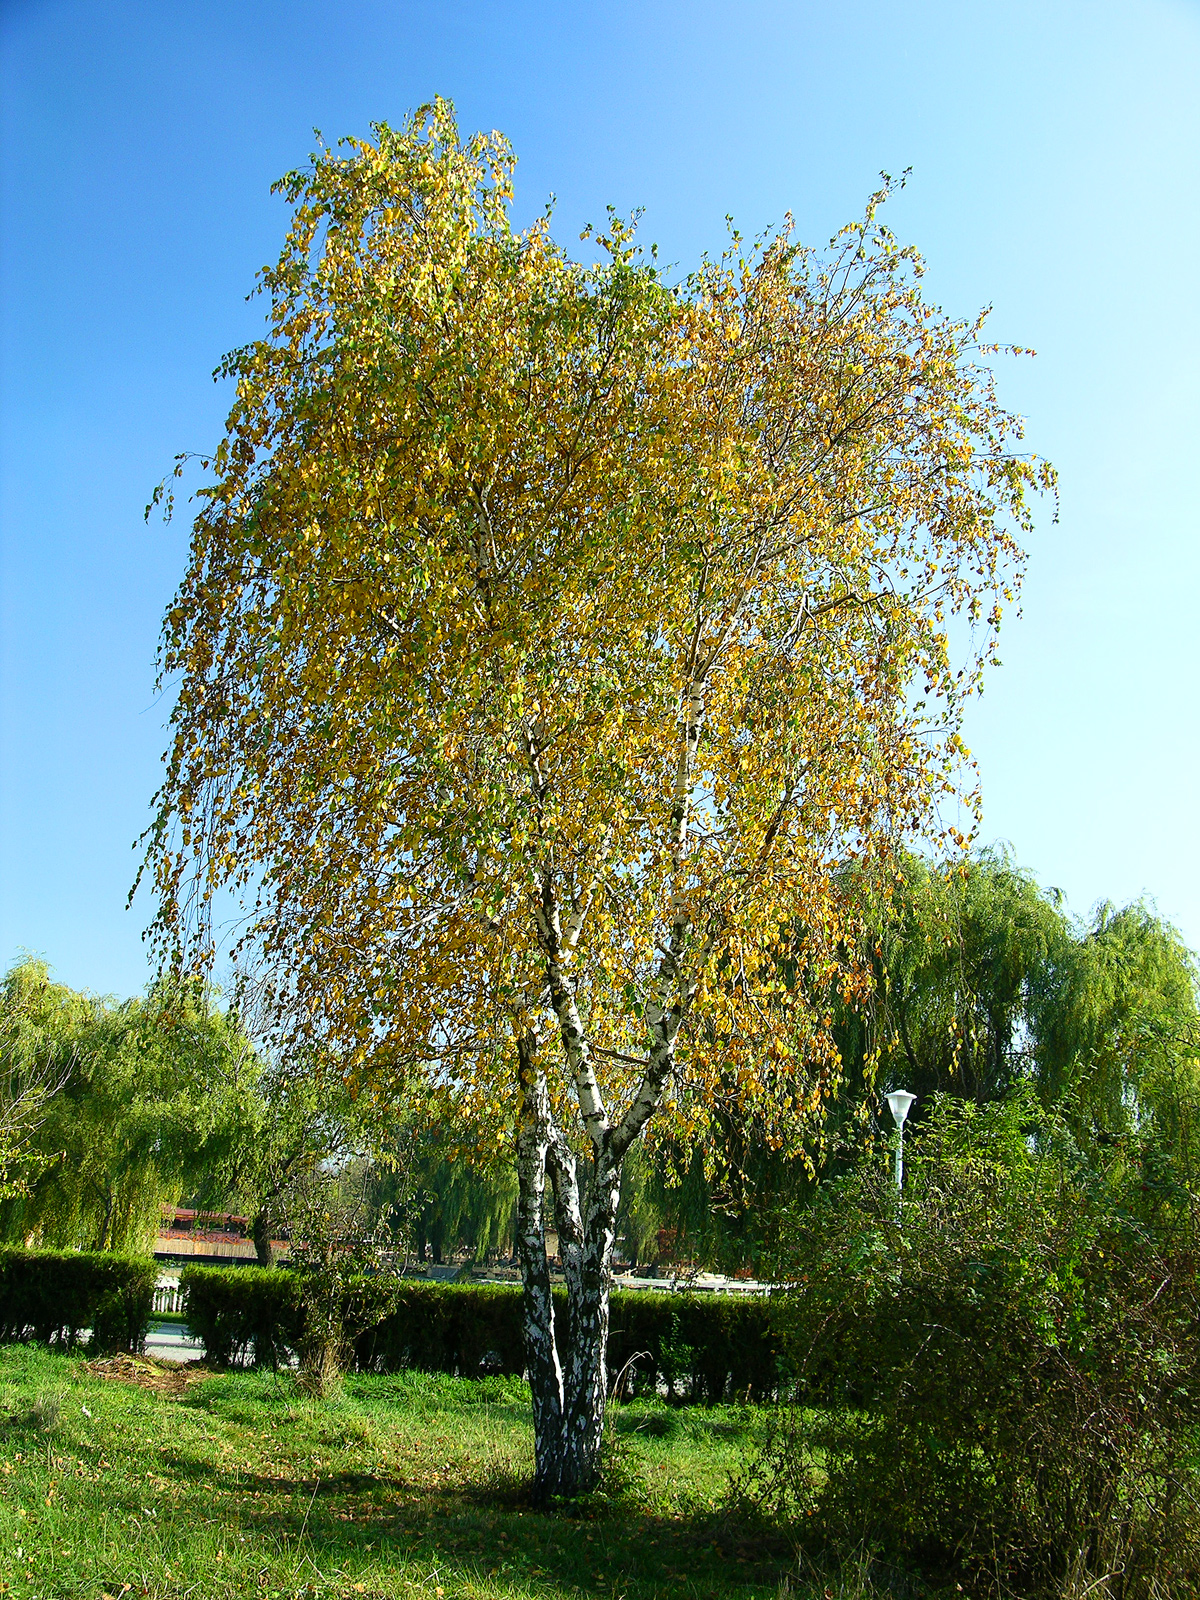 Birch tree in a park in fall colours